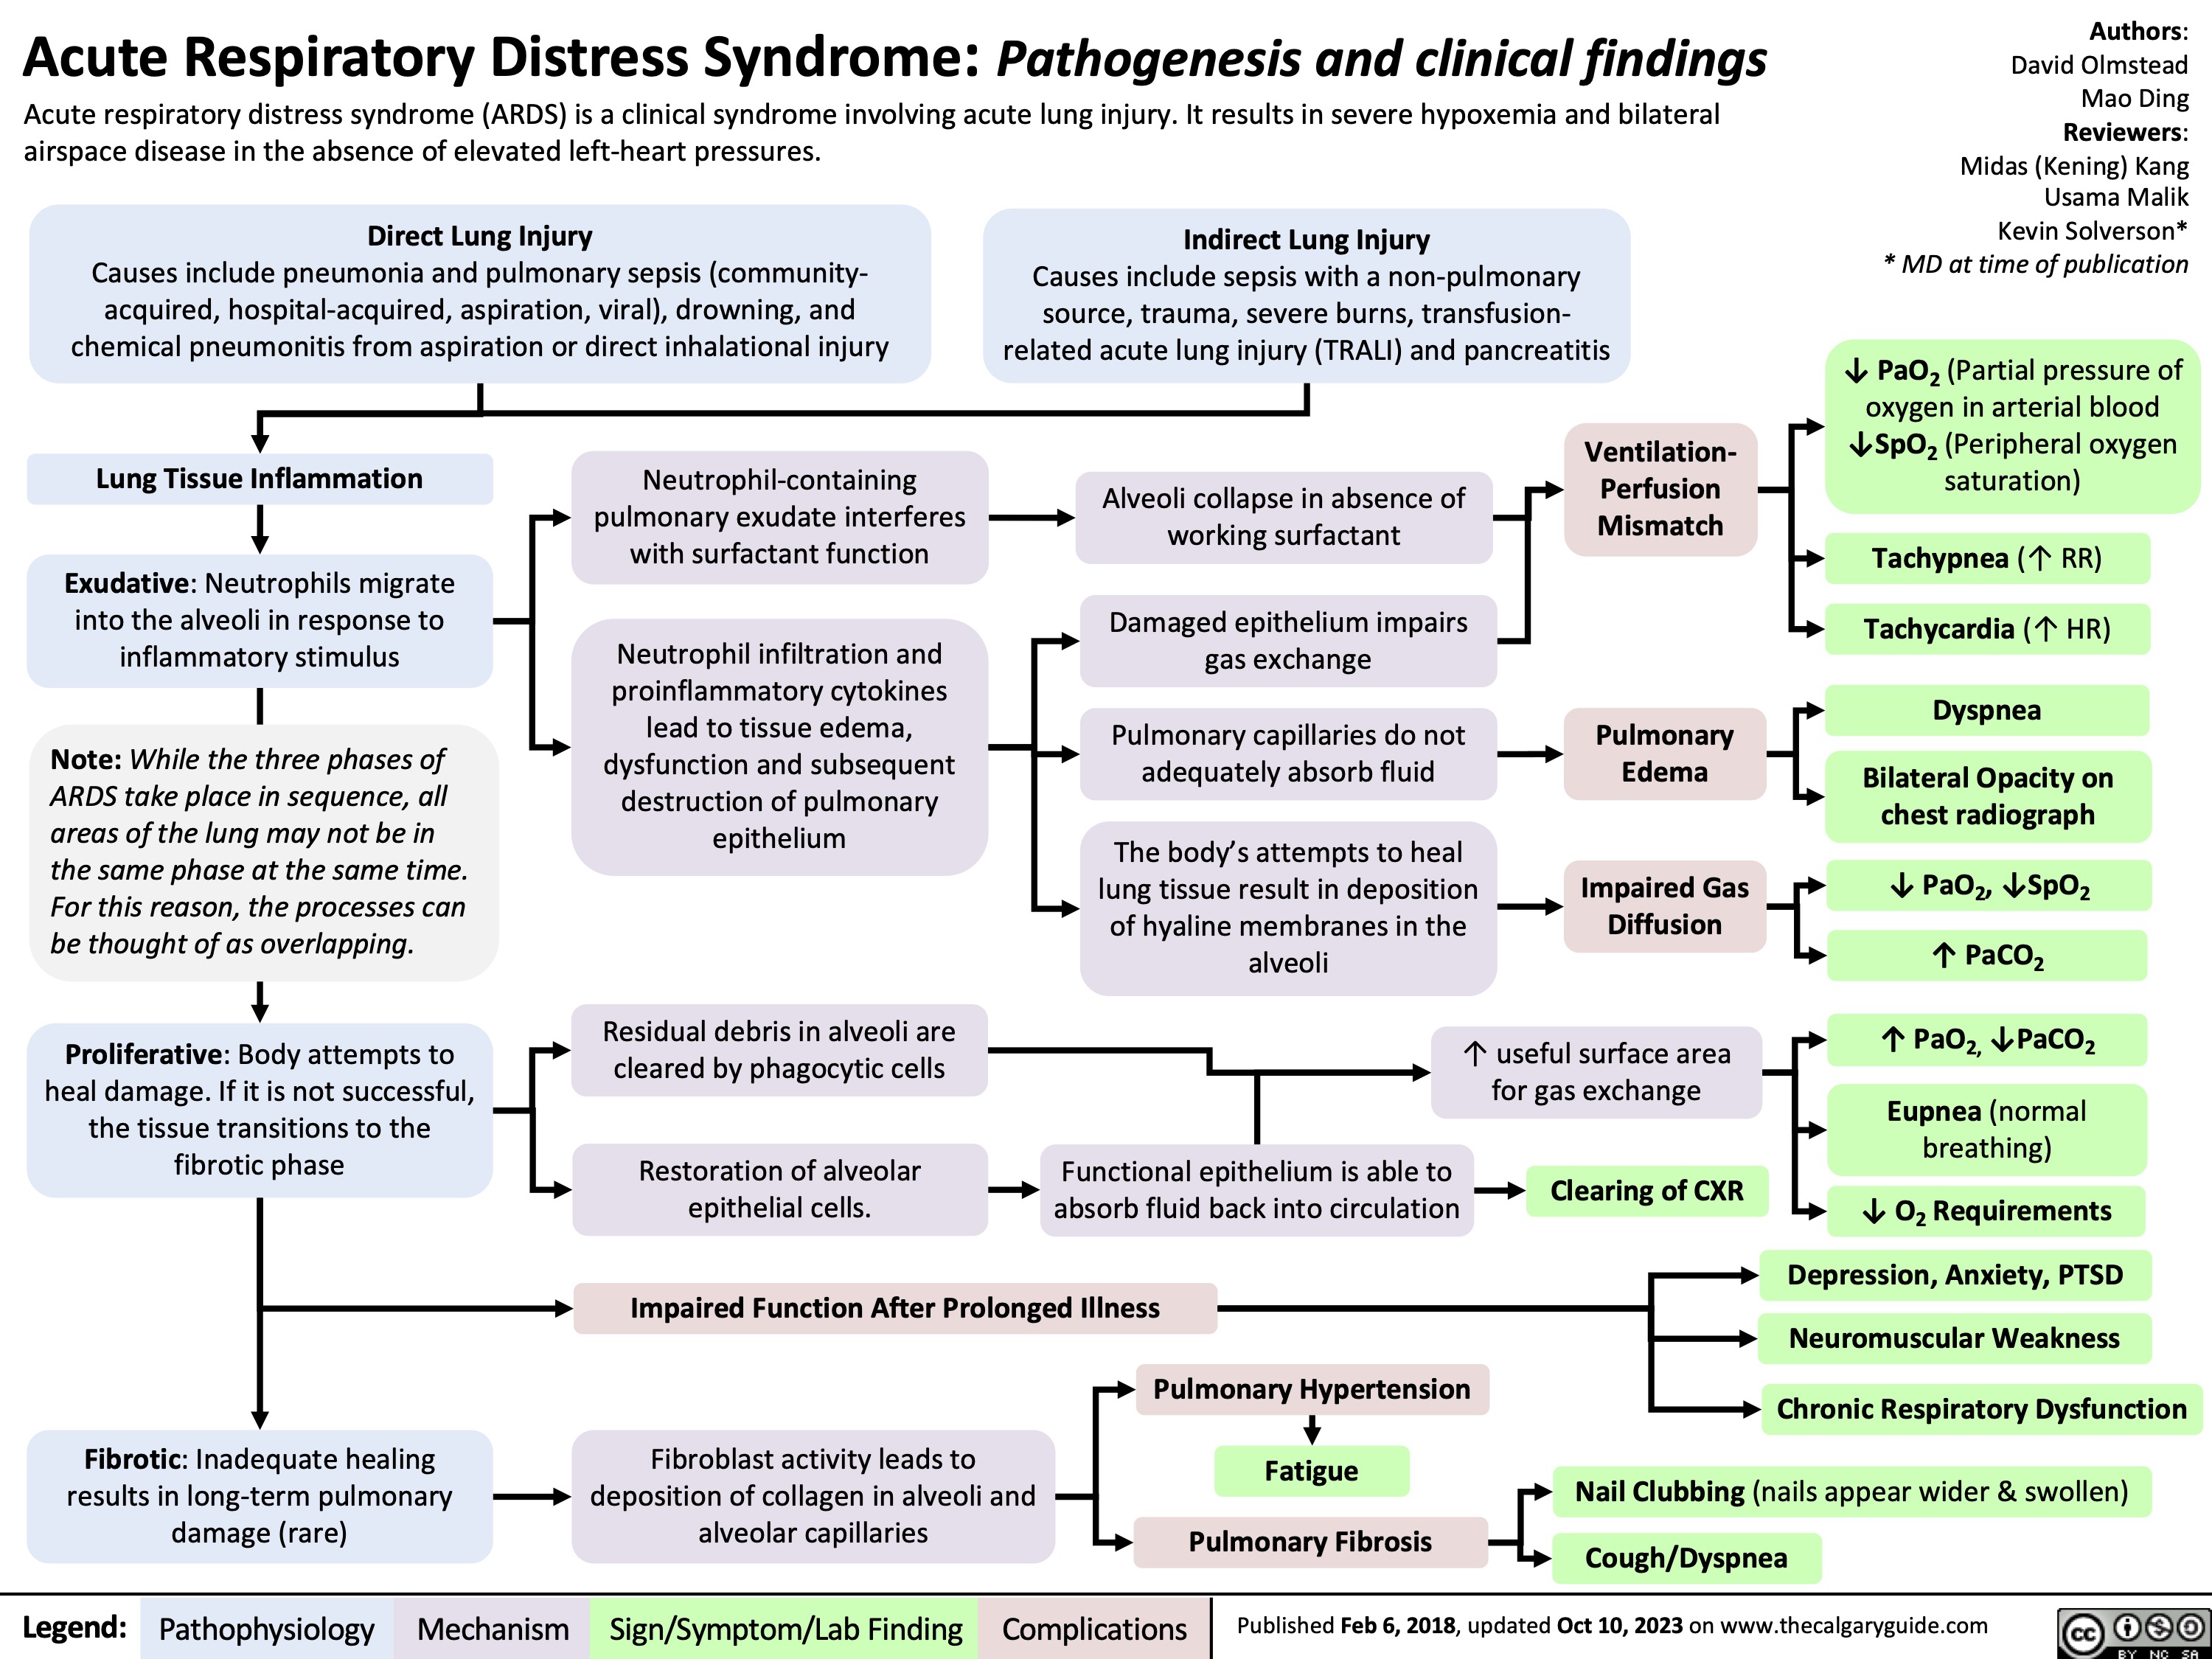 Acute Respiratory Distress Syndrome: Pathogenesis and clinical findings Acute respiratory distress syndrome (ARDS) is a clinical syndrome involving acute lung injury. It results in severe hypoxemia and bilateral
Authors: David Olmstead Mao Ding Reviewers: Midas (Kening) Kang Usama Malik Kevin Solverson* * MD at time of publication
↓ PaO2 (Partial pressure of oxygen in arterial blood ↓SpO2 (Peripheral oxygen saturation)
Tachypnea (↑ RR) Tachycardia (↑ HR)
Dyspnea
Bilateral Opacity on chest radiograph
↓ PaO2, ↓SpO2
↑ PaCO 2
↑ PaO2, ↓PaCO2 Eupnea (normal
breathing)
↓ O2 Requirements Depression, Anxiety, PTSD Neuromuscular Weakness
Chronic Respiratory Dysfunction
airspace disease in the absence of elevated left-heart pressures.
Direct Lung Injury
Causes include pneumonia and pulmonary sepsis (community- acquired, hospital-acquired, aspiration, viral), drowning, and chemical pneumonitis from aspiration or direct inhalational injury
Indirect Lung Injury
Causes include sepsis with a non-pulmonary source, trauma, severe burns, transfusion- related acute lung injury (TRALI) and pancreatitis
        Lung Tissue Inflammation
Exudative: Neutrophils migrate into the alveoli in response to inflammatory stimulus
Note: While the three phases of ARDS take place in sequence, all areas of the lung may not be in the same phase at the same time. For this reason, the processes can be thought of as overlapping.
Proliferative: Body attempts to heal damage. If it is not successful, the tissue transitions to the fibrotic phase
Neutrophil-containing pulmonary exudate interferes with surfactant function
Neutrophil infiltration and proinflammatory cytokines lead to tissue edema, dysfunction and subsequent destruction of pulmonary epithelium
Residual debris in alveoli are cleared by phagocytic cells
Restoration of alveolar epithelial cells.
Alveoli collapse in absence of working surfactant
Damaged epithelium impairs gas exchange
Pulmonary capillaries do not adequately absorb fluid
The body’s attempts to heal lung tissue result in deposition of hyaline membranes in the alveoli
Ventilation- Perfusion Mismatch
Pulmonary Edema
Impaired Gas Diffusion
                              Functional epithelium is able to absorb fluid back into circulation
↑ useful surface area for gas exchange
Clearing of CXR
       Impaired Function After Prolonged Illness
Pulmonary Hypertension
      Fibrotic: Inadequate healing results in long-term pulmonary damage (rare)
Fibroblast activity leads to deposition of collagen in alveoli and alveolar capillaries
Fatigue Pulmonary Fibrosis
Nail Clubbing (nails appear wider & swollen) Cough/Dyspnea
     Legend:
 Pathophysiology
 Mechanism
Sign/Symptom/Lab Finding
 Complications
 Published Feb 6, 2018, updated Oct 10, 2023 on www.thecalgaryguide.com
  
Acute Respiratory Distress Syndrome: Note: Acute respiratory distress syndrome is a clinical
Authors: David Olmstead Reviewers: Midas (Kening) Kang Usama Malik Kevin Solverson* * MD at time of publication
 Pathogenesis and clinical findings
Direct Lung Injury
Causes include pneumonia and pulmonary sepsis (community-acquired, hospital-acquired, aspiration, viral), drowning, and chemical pneumonitis from aspiration or direct inhalational injury
Indirect Lung Injury
syndrome involving acute lung injury. It results in severe hypoxemia and bilateral airspace disease in the absence of elevated left-heart pressures.
  Causes include sepsis with a non-pulmonary source, trauma, severe burns, transfusion-related acute lung injury (TRALI) and pancreatitis
        Lung Tissue Inflammation
Exudative: Neutrophils migrate into the alveoli in response to inflammatory stimulus
Note: While the three phases of ARDS take place in sequence, all areas of the lung may not be in the same phase at the same time. For this reason, the processes can be thought of as overlapping.
Proliferative: Body attempts to heal damage. If it is not successful, the tissue transitions to the fibrotic phase
Neutrophil-containing pulmonary exudate interferes with surfactant function
Neutrophil infiltration and proinflammatory cytokines lead to tissue edema, dysfunction and subsequent destruction of pulmonary epithelium
Abbreviations:
PaO2: Partial pressure of oxygen in arterial blood
SpO2: Peripheral oxygen saturation.
CXR: Chest radiograph.
Residual debris in alveoli are cleared by phagocytic cells
Restoration of alveolar epithelial cells.
Alveoli collapse in absence of working surfactant
Damaged epithelium impairs gas exchange
Pulmonary capillaries do not adequately absorb fluid
The body’s attempts to heal lung tissue result in
deposition of hyaline membranes in the alveoli
Ventilation- Perfusion Mismatch
Pulmonary Edema
Impaired Gas Diffusion
↓ PaO2, ↓SpO2 Tachypnea
Tachycardia
Dyspnea
Bilateral Opacity on CXR
↓ PaO , ↓SpO 2 2
↑ PaCO2
↑ PaO2, ↓PaCO2 Eupnea
↓ O2 Requirements
Clearing of CXR
Depression, Anxiety, PTSD
Neuromuscular Weakness
Chronic Respiratory Dysfunction
                                 ↑ useful surface area for gas exchange
Functional epithelium is able to absorb fluid back into circulation
            Impaired Function After Prolonged Illness
      Fibrotic: Inadequate healing results in long-term pulmonary damage (rare)
Fibroblast activity leads to deposition of collagen in alveoli and alveolar capillaries
Pulmonary Fibrosis
Pulmonary Hypertension
Cough/Dyspnea Nail Clubbing Fatigue
        Legend:
 Pathophysiology
 Mechanism
Sign/Symptom/Lab Finding
 Complications
Published February 06, 2018 on www.thecalgaryguide.com
   